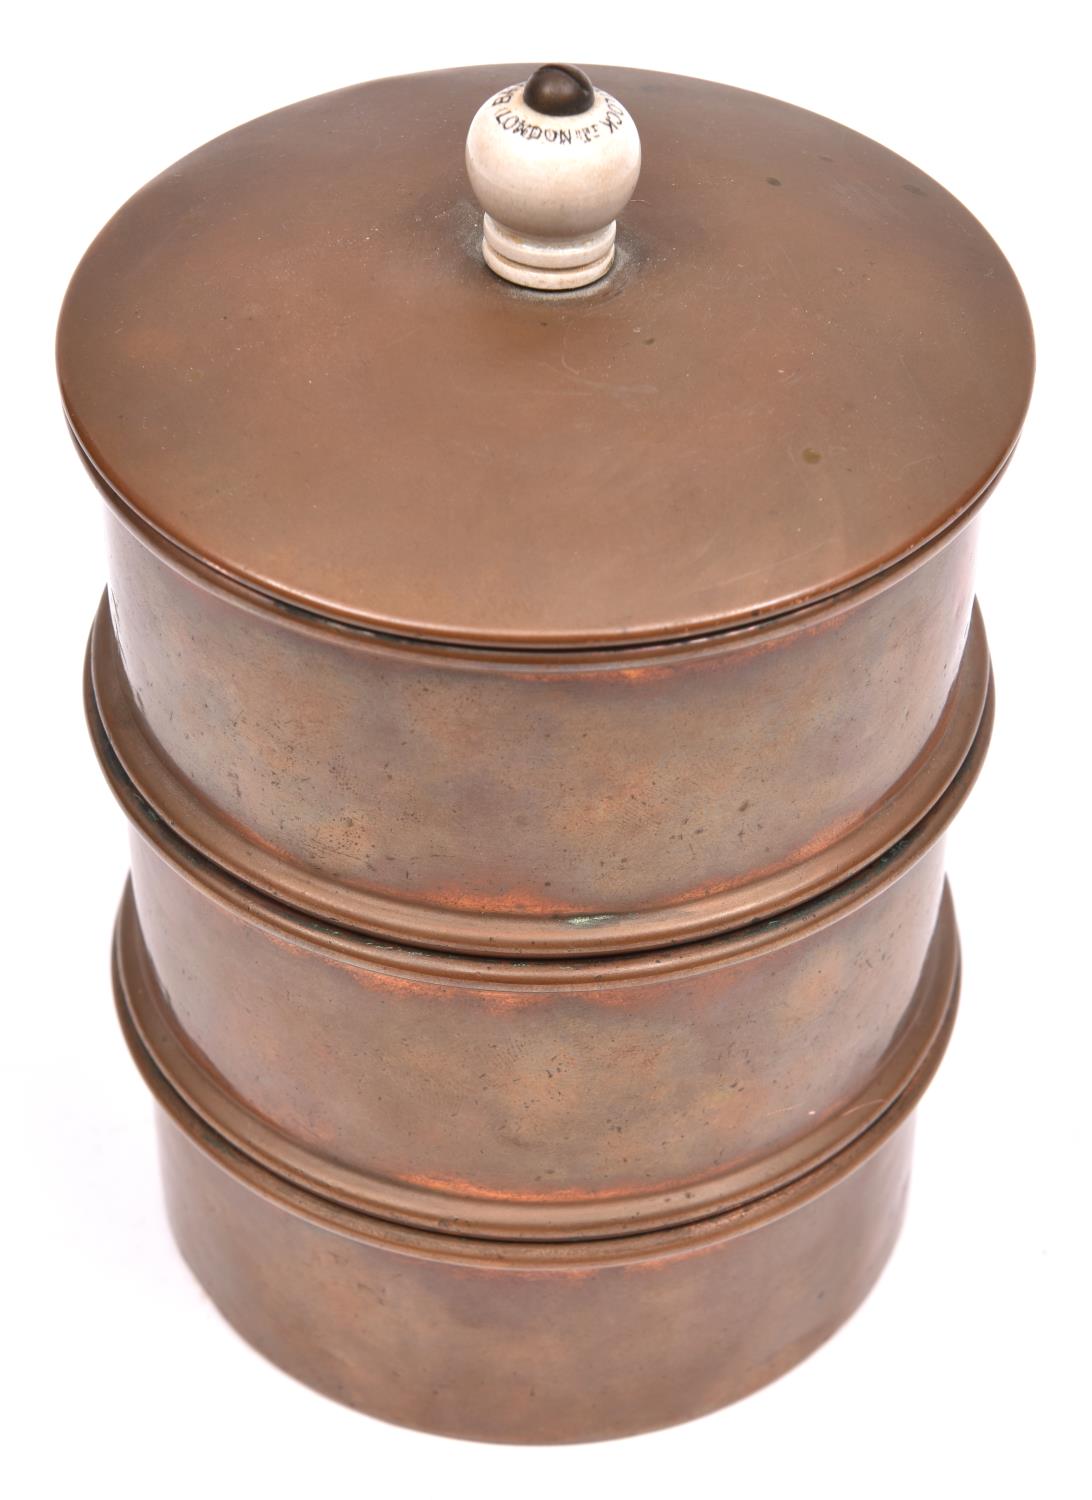 A 3 section cylindrical copper grader, possibly for gunpowder, height 6½", diameter 4½", with